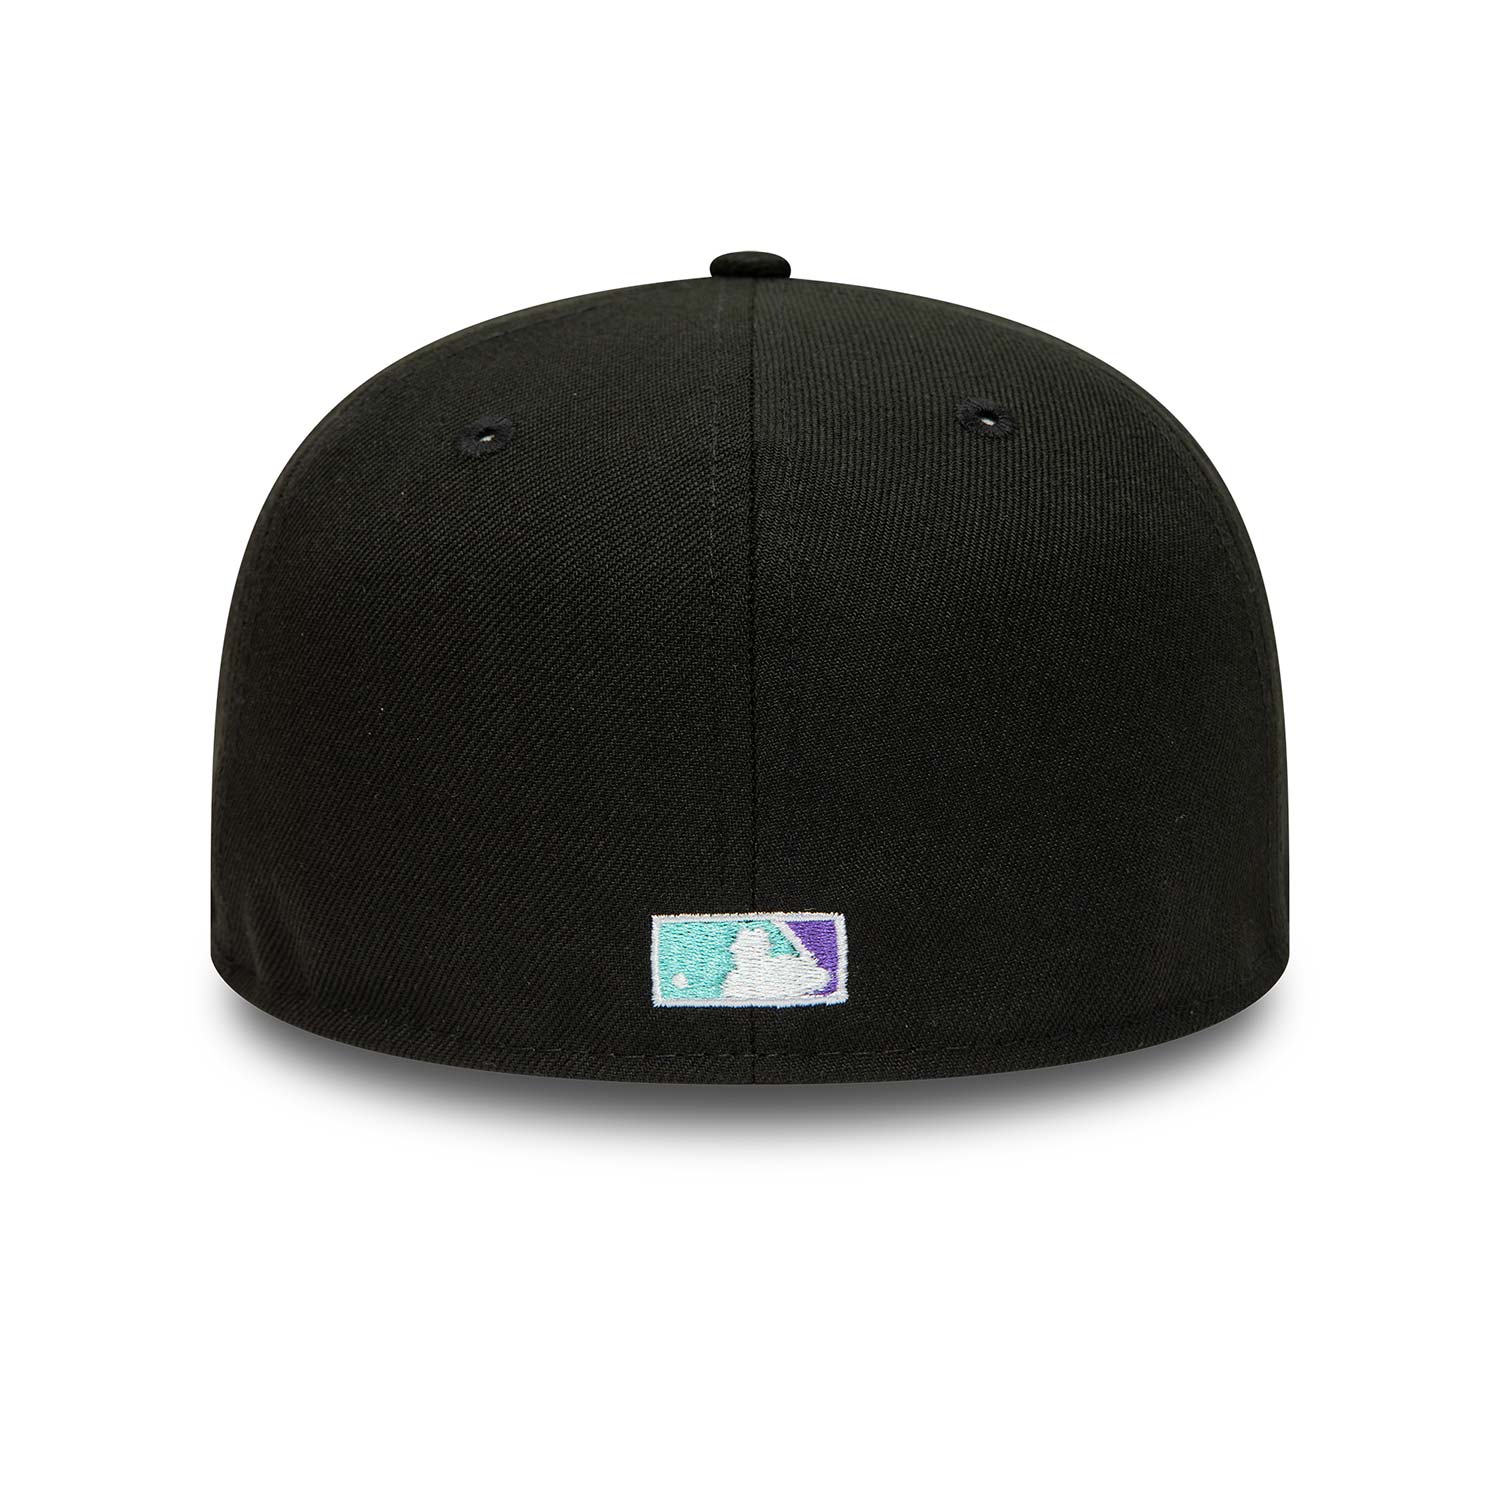 Anahiem Angels Black and Blue Tint 59FIFTY Fitted Cap